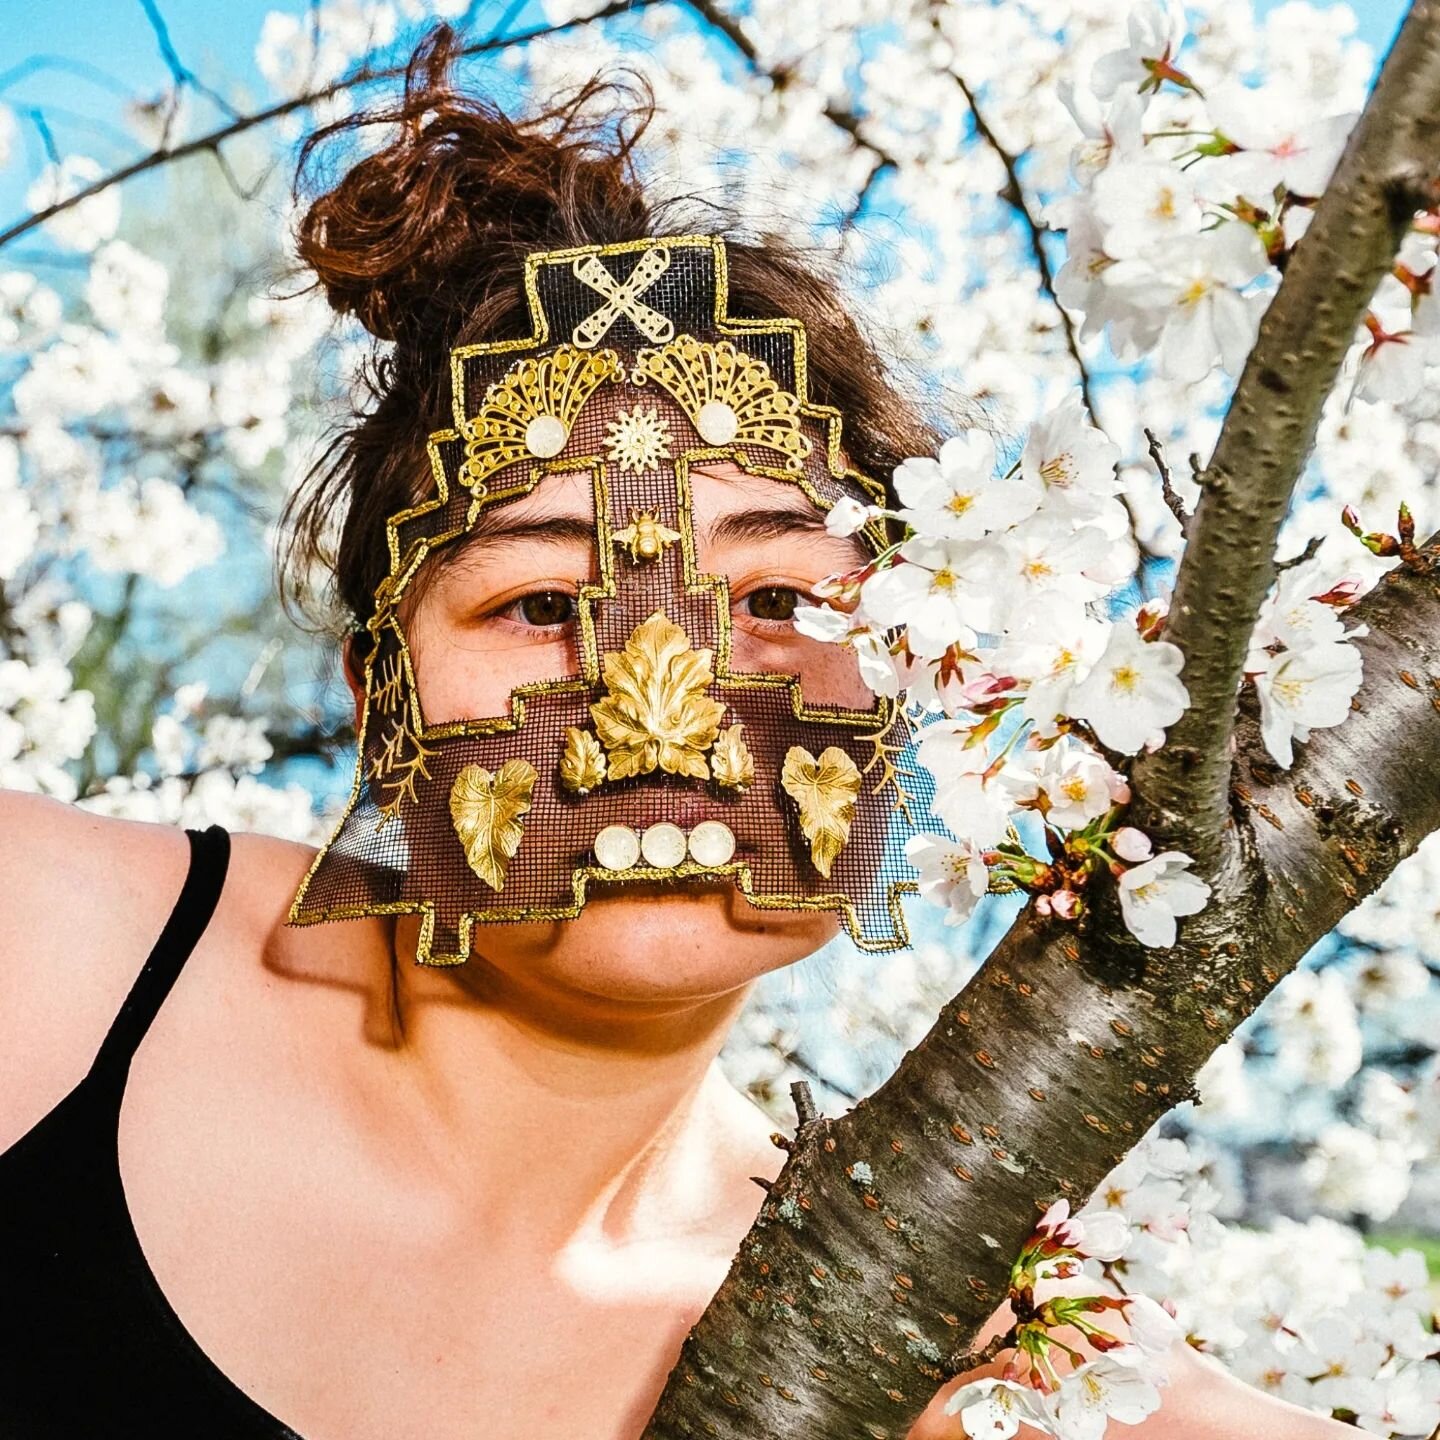 Happy Tuesday! This week's post is brought to you by the letter J. 🌸🌸🌸

--------
--------
--------

Juju really enjoyed this shoot, mostly because of the cherry blossoms, but also because they got to climb into a tree. 🌳💛💛

#maskemaiden #maskph